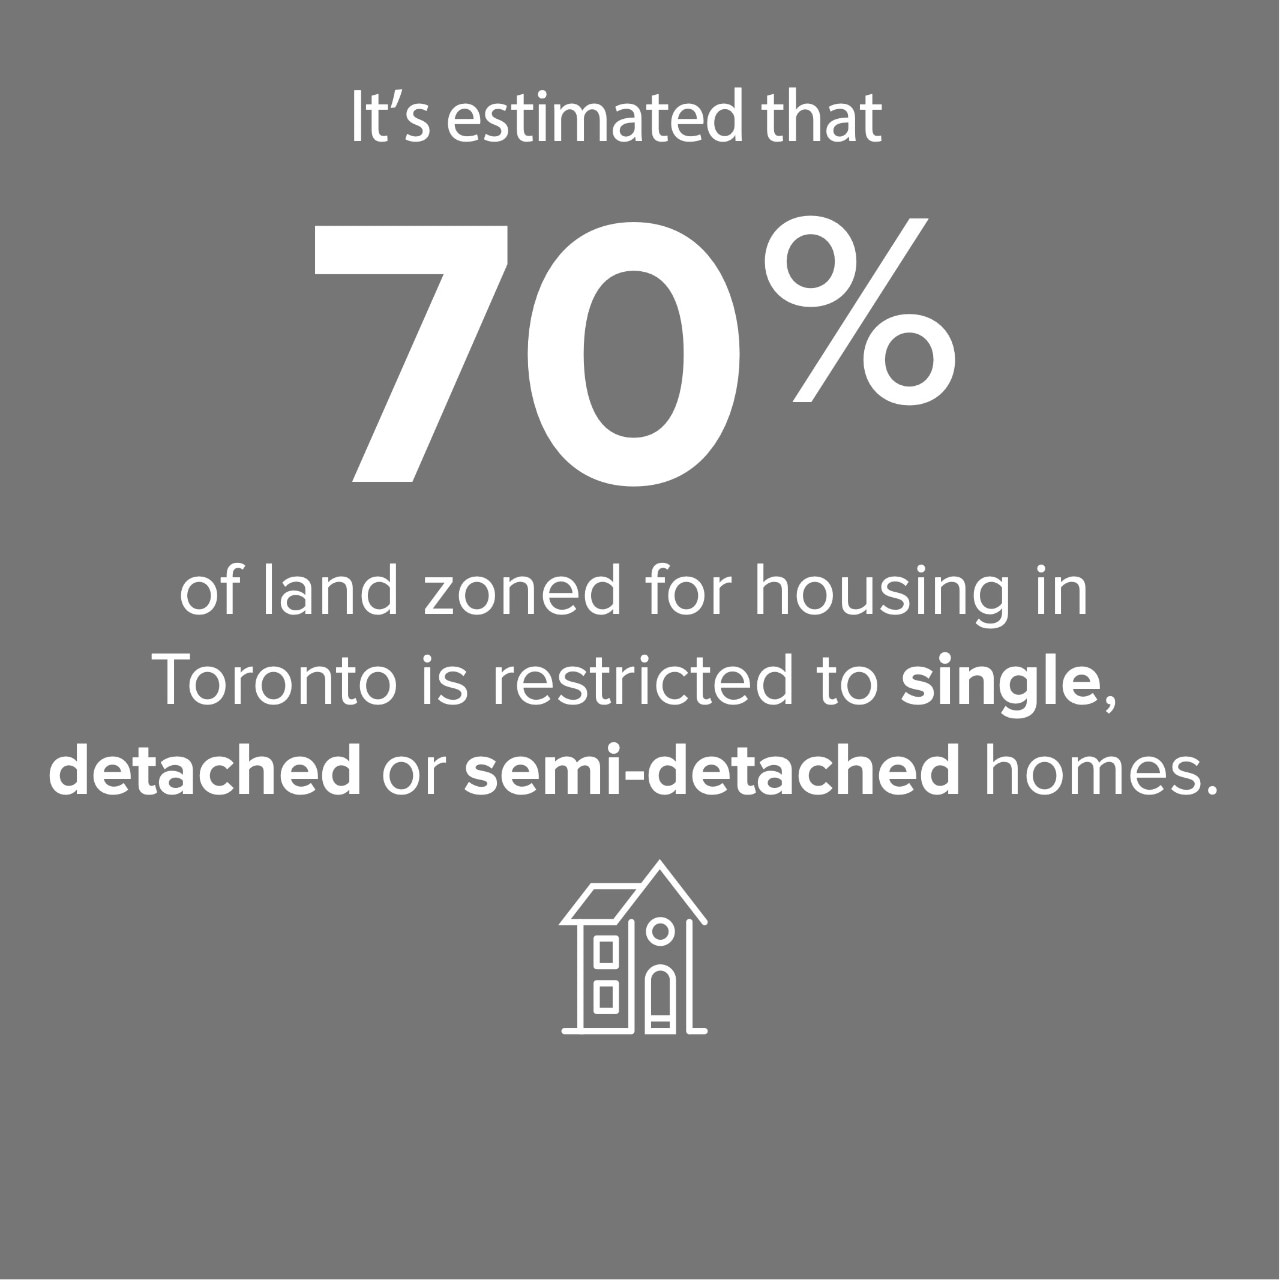 It is estimated that 70% of land zoned for housing in Toronto is restricted to single, detached or semi-detached homes.